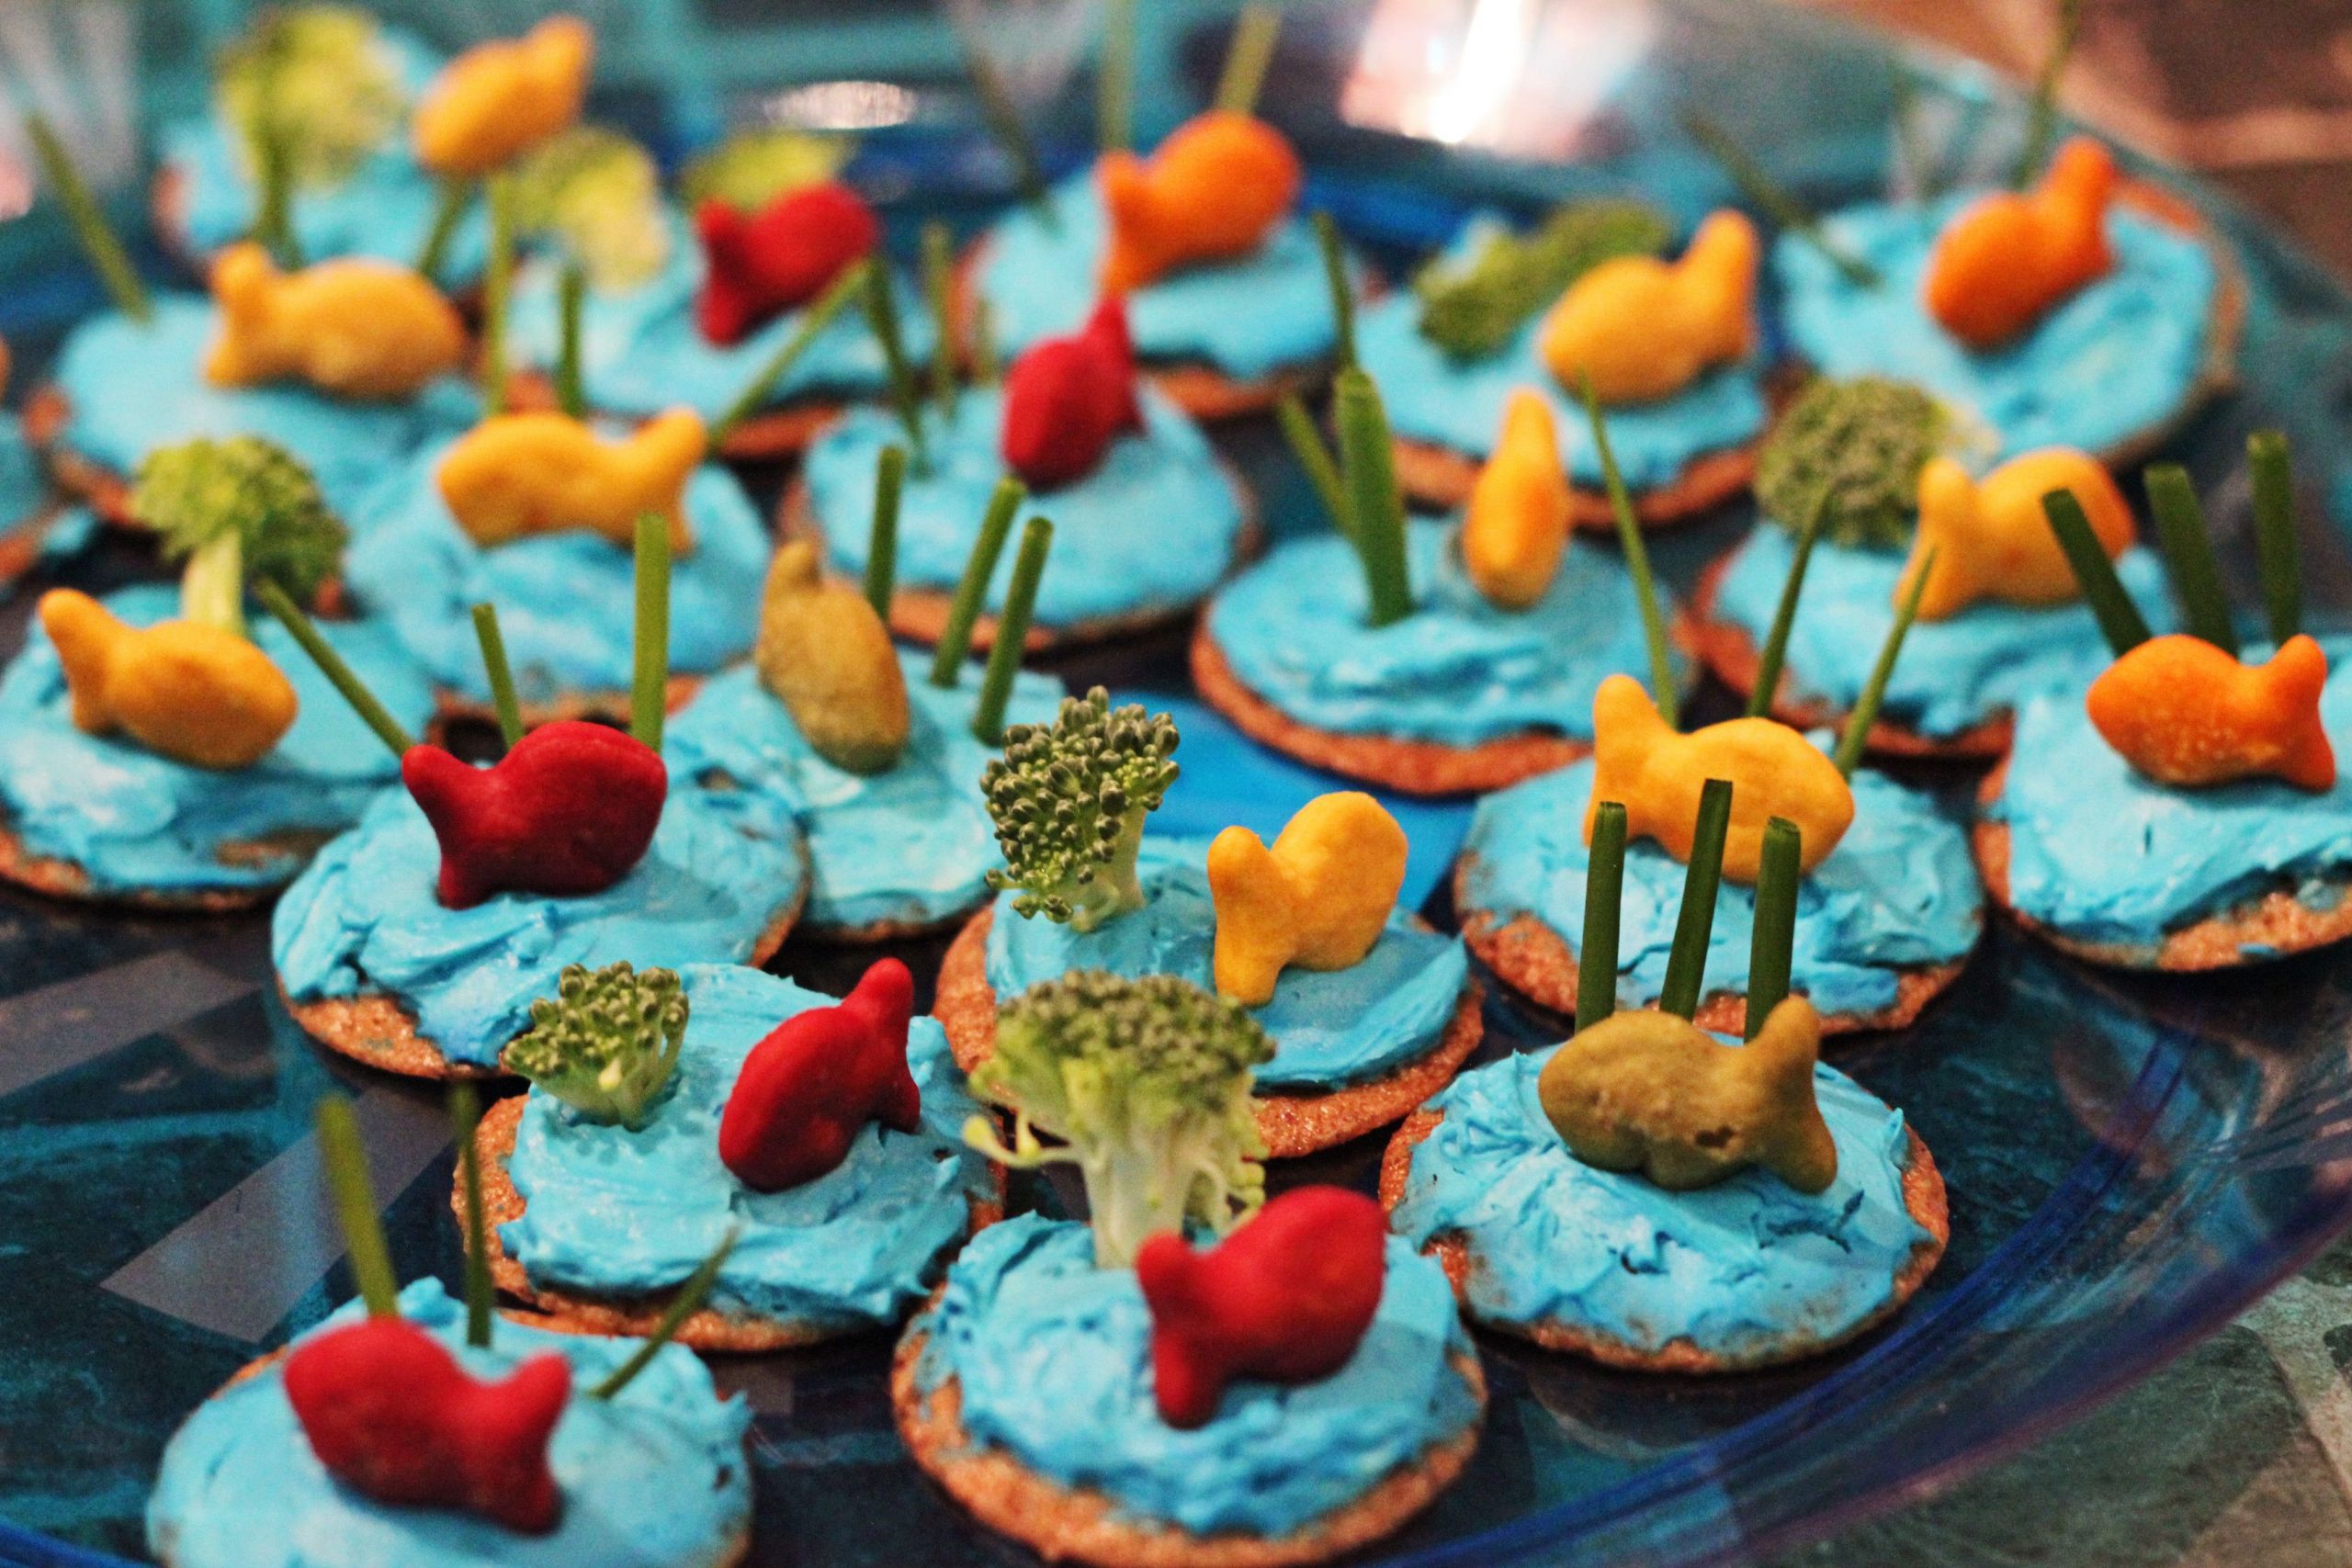 60S Beach Party Food Ideas
 Tinted cream cheese is spread on Ritz cracker with